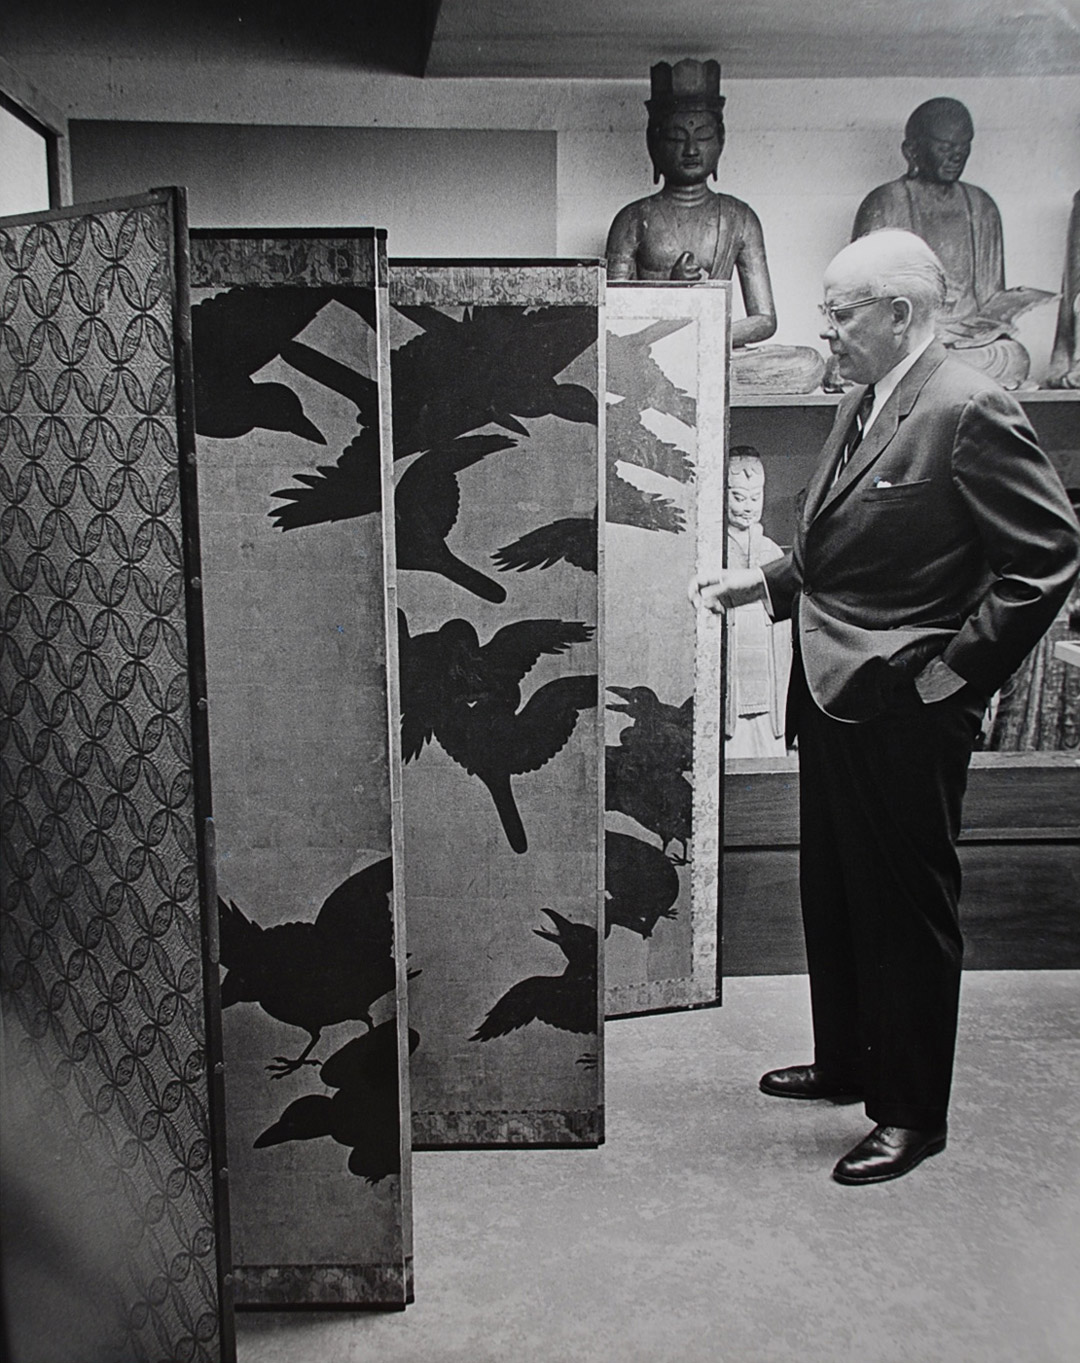 Dr. Fuller in storage with Crows screen